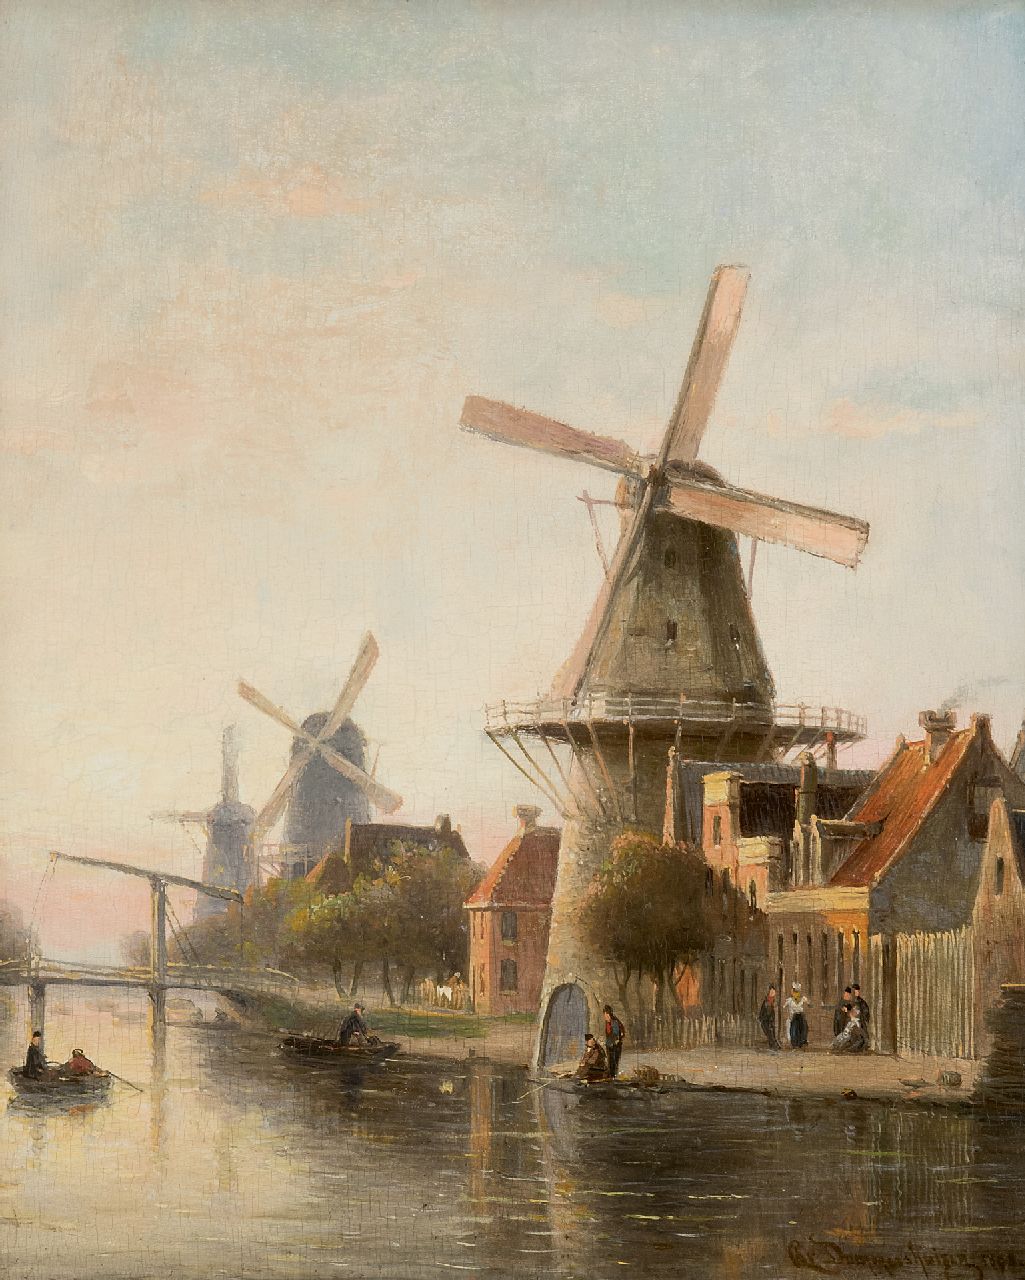 Dommelshuizen C.C.  | Cornelis Christiaan Dommelshuizen, Windmill 'De Rosenboom' near the Overtoom, Amsterdam, oil on panel 28.4 x 23.0 cm, signed l.r. and indistinctly dated 189[?]8